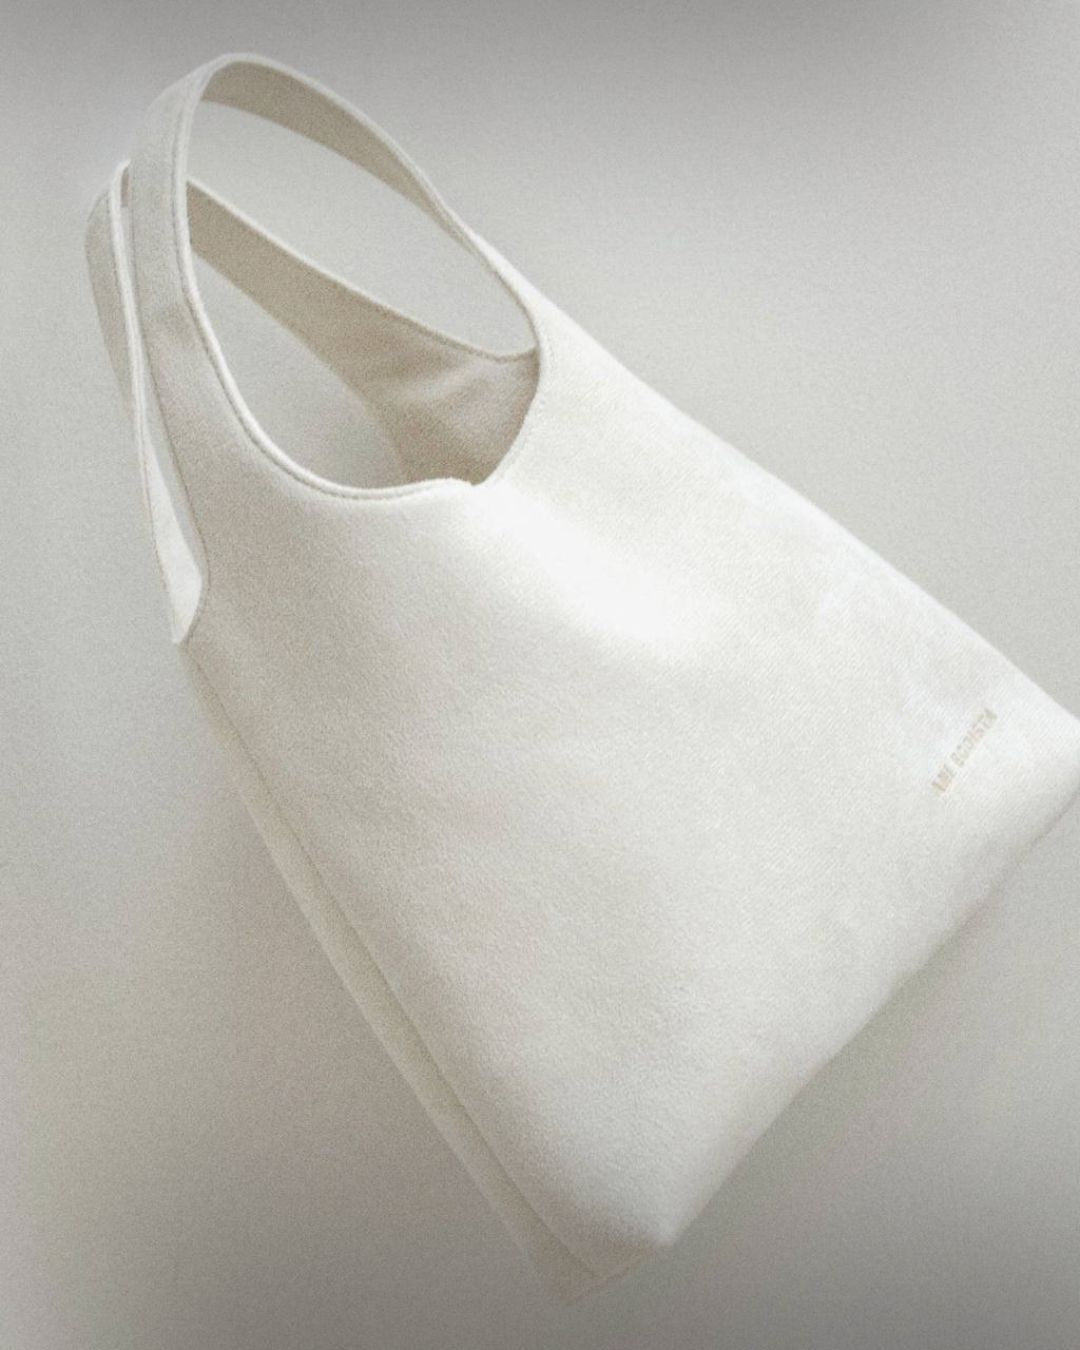 White reusable bag by Enso Design Lab, designed by Ani Han. The bag emphasizes sustainability and minimalist design, perfect for everyday use.